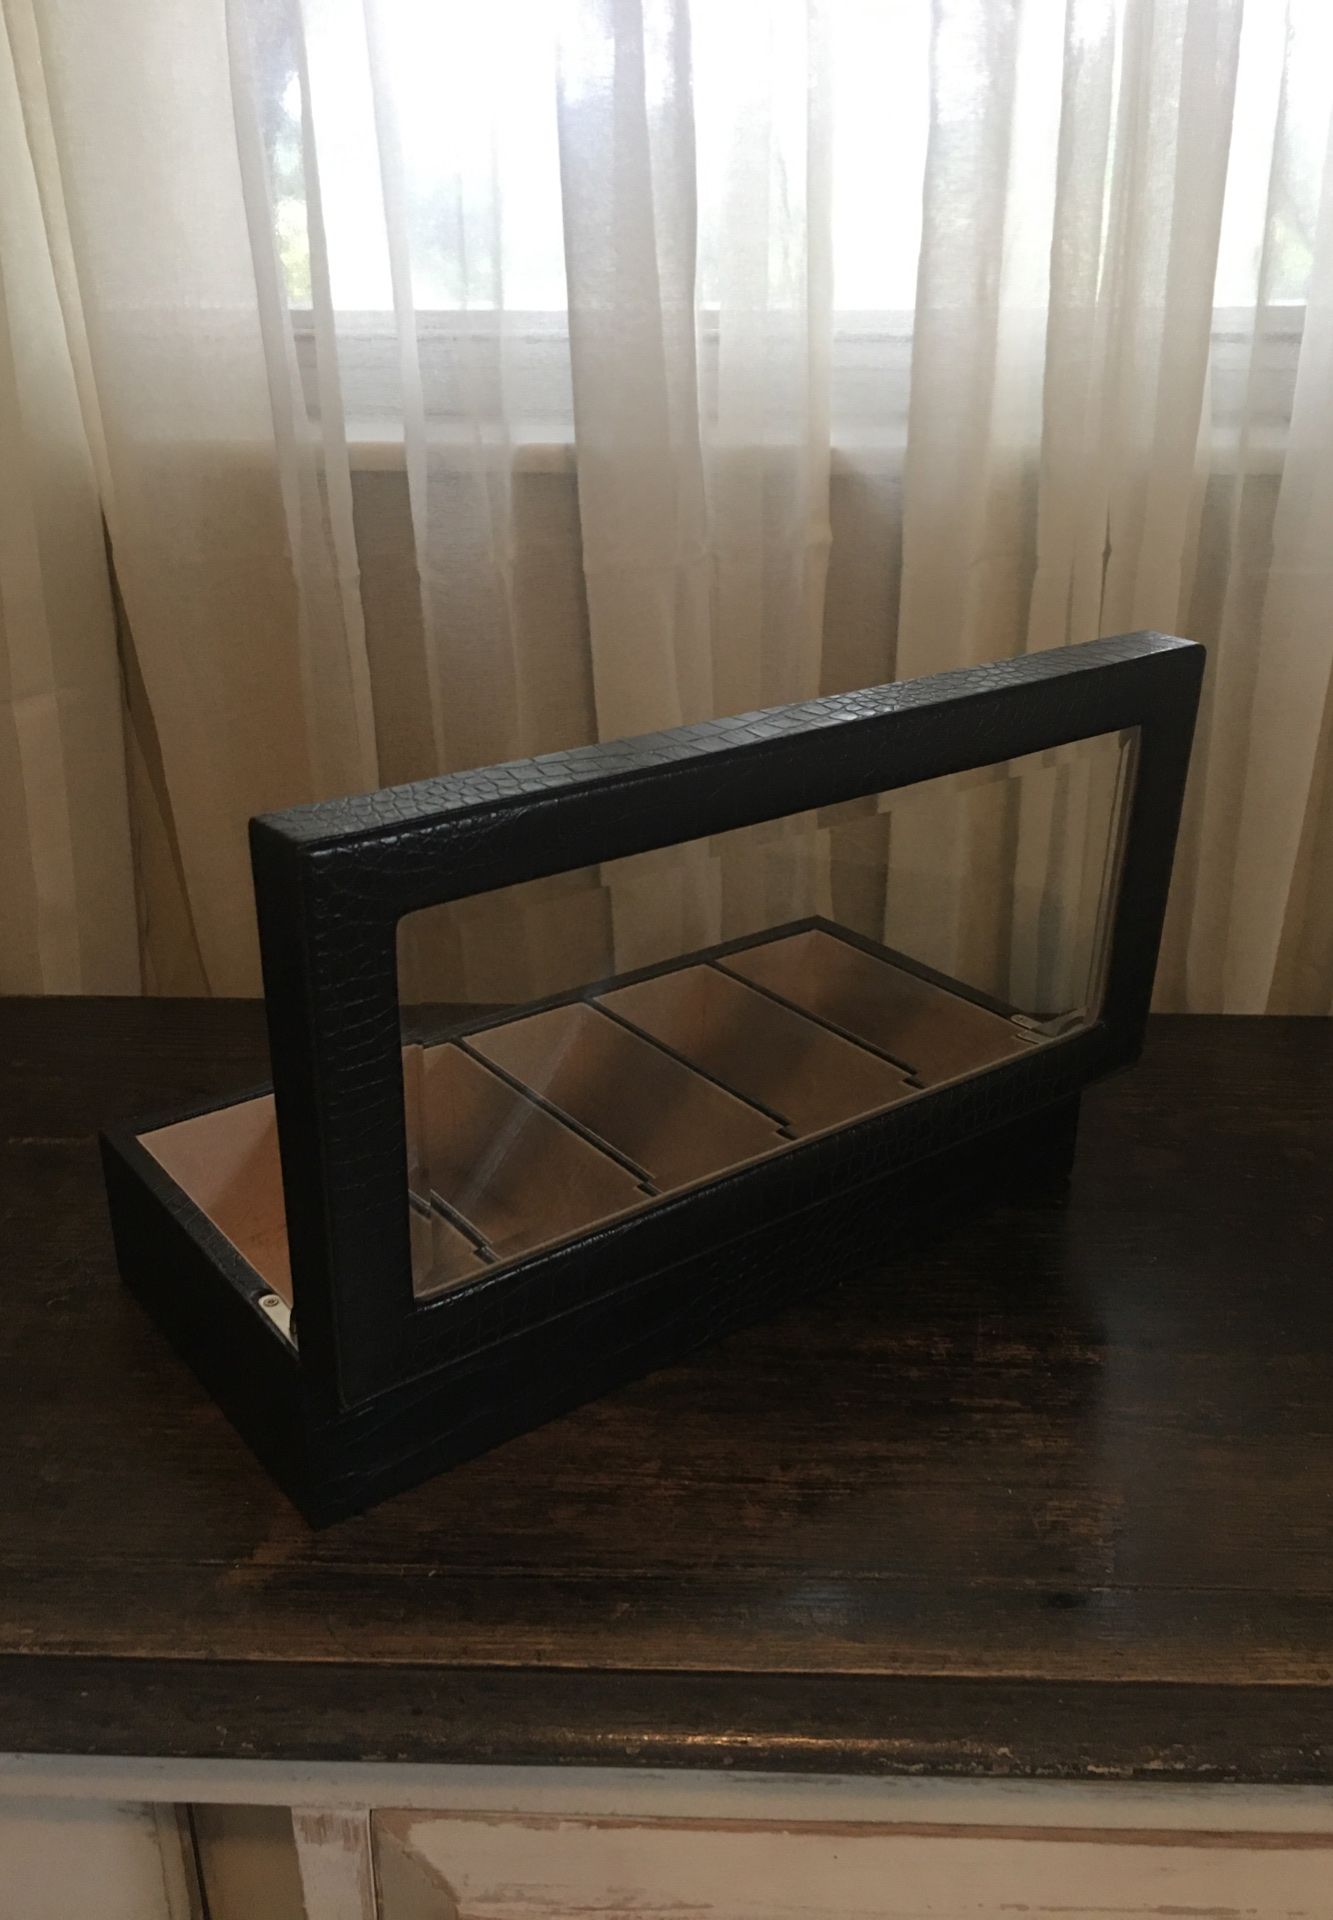 Watch or sunglass display case